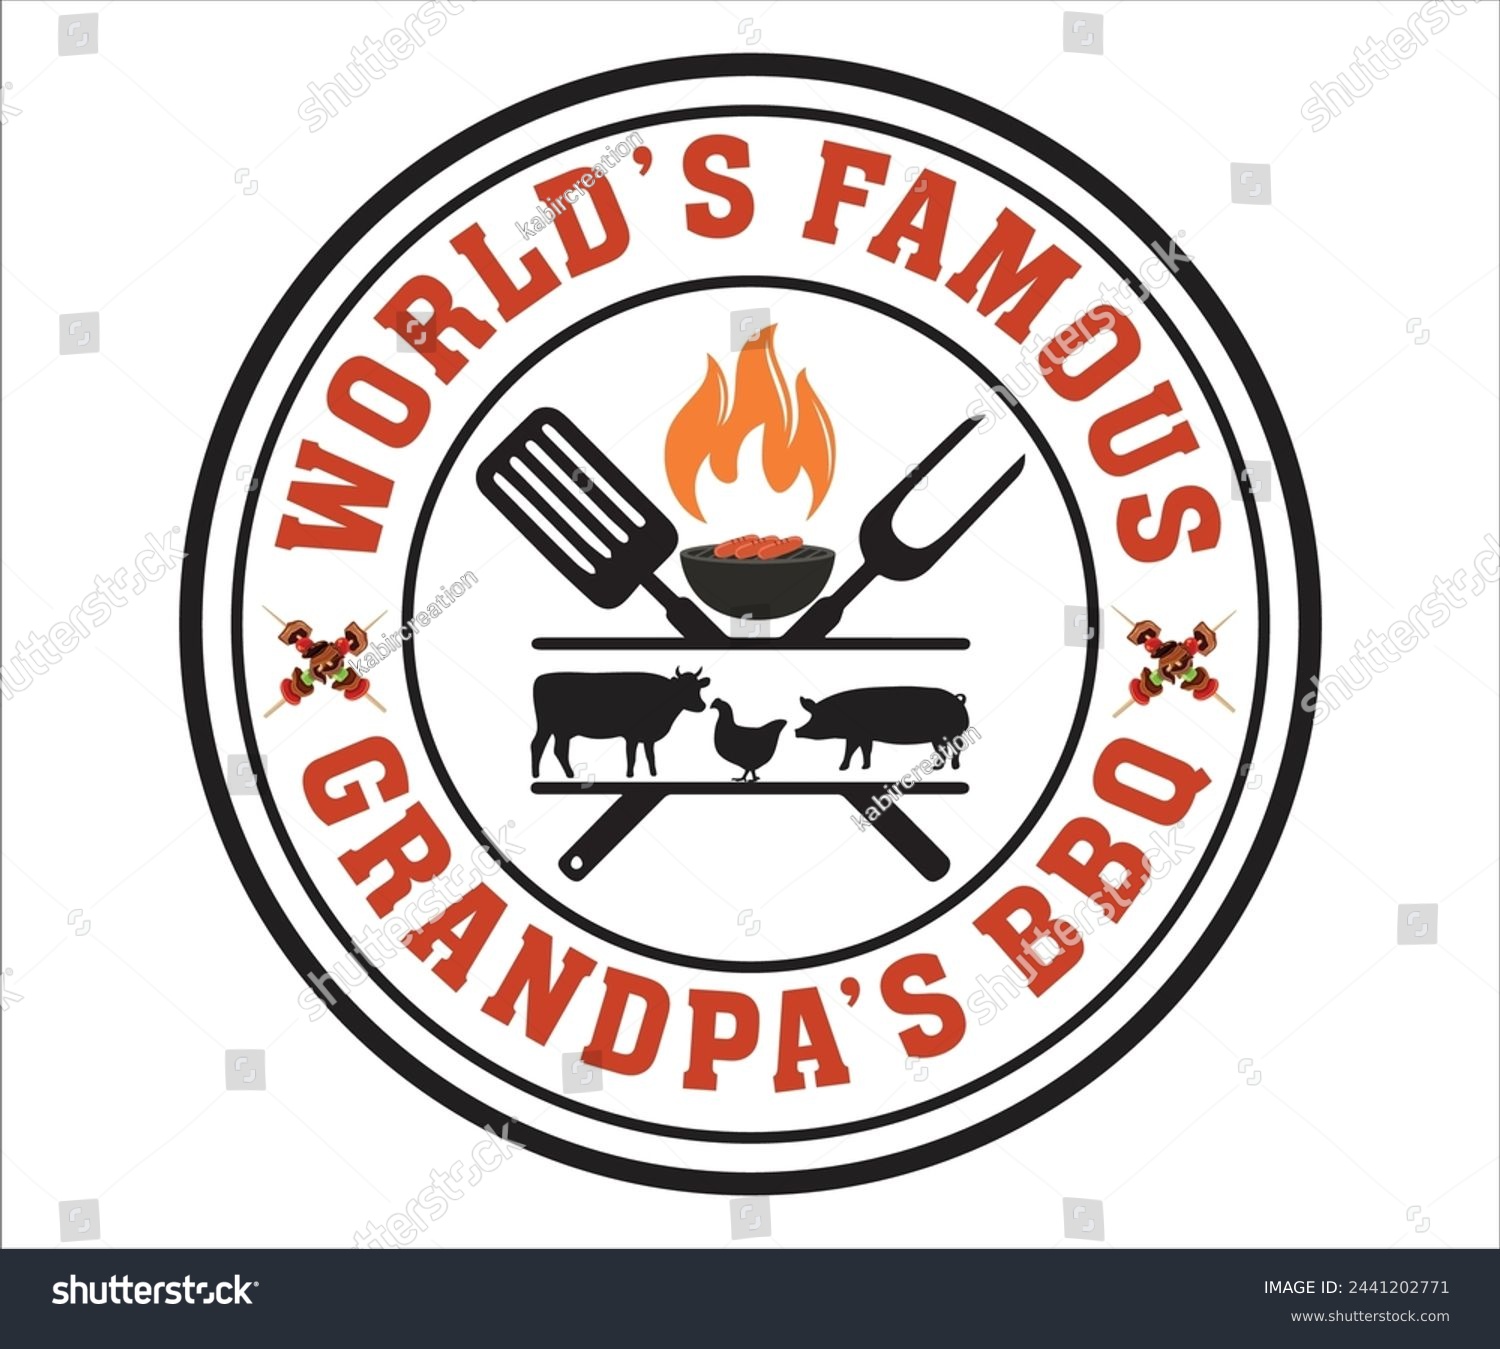 SVG of World’s Famous Grandpa’s Bbq T-shirt, Barbeque Svg,Kitchen Svg,BBQ design, Barbeque party, Funny Barbecue Quotes, Cut File for Cricut svg